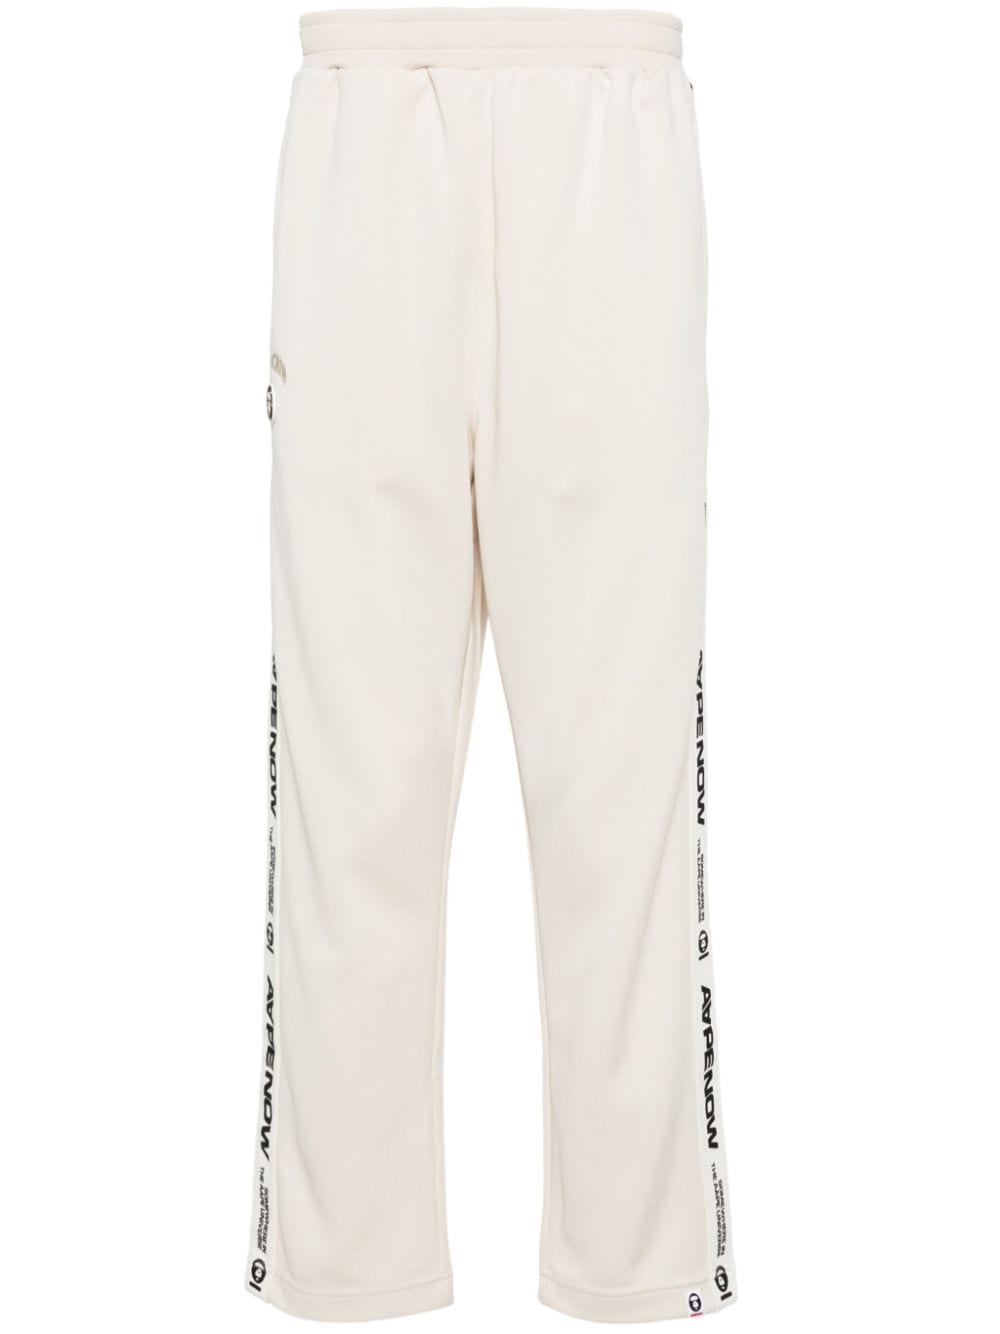 AAPE BY *A BATHING APE® logo-embroidered track pants